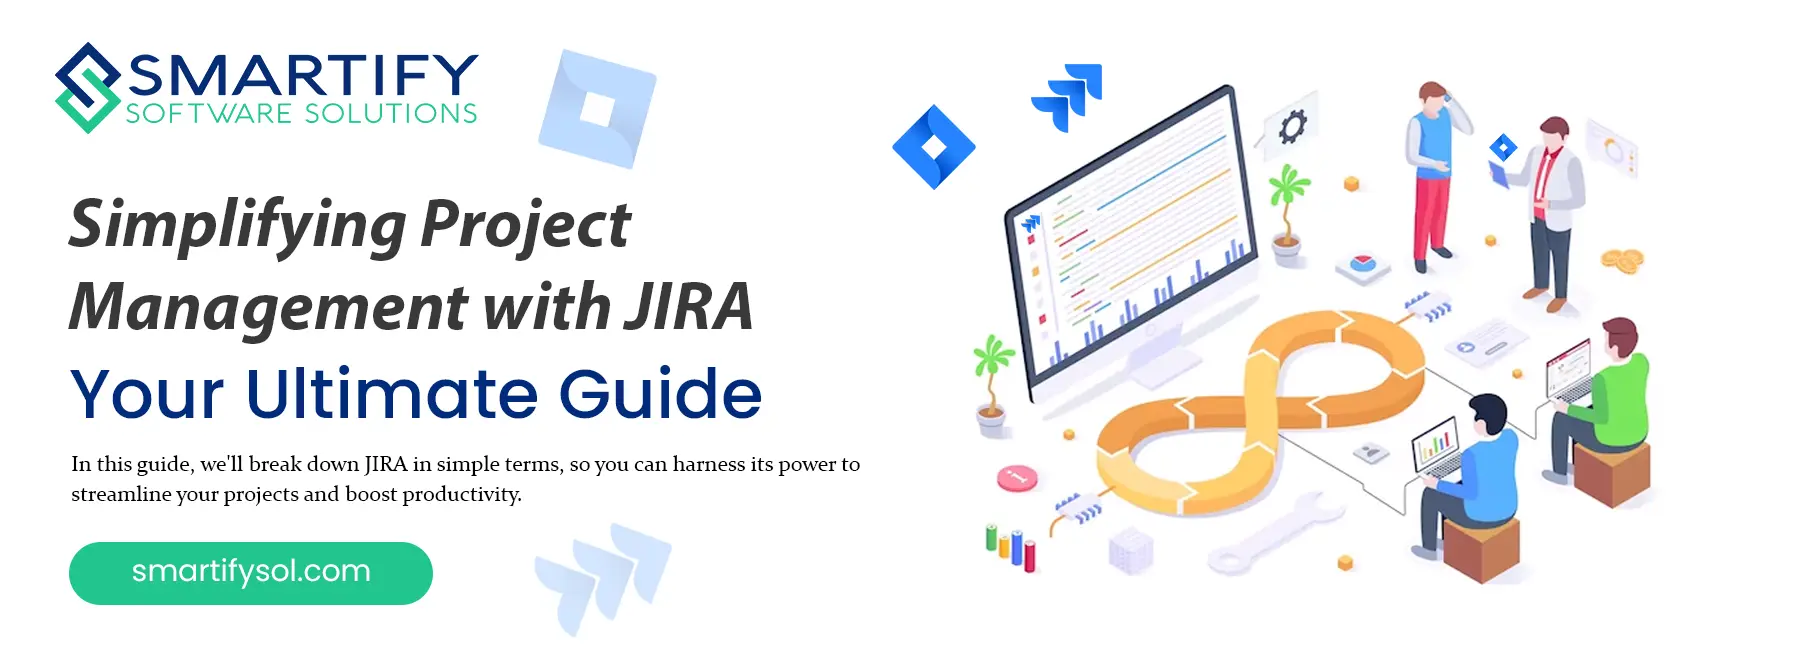 Simplifying Project Management with JIRA: Your Ultimate Guide